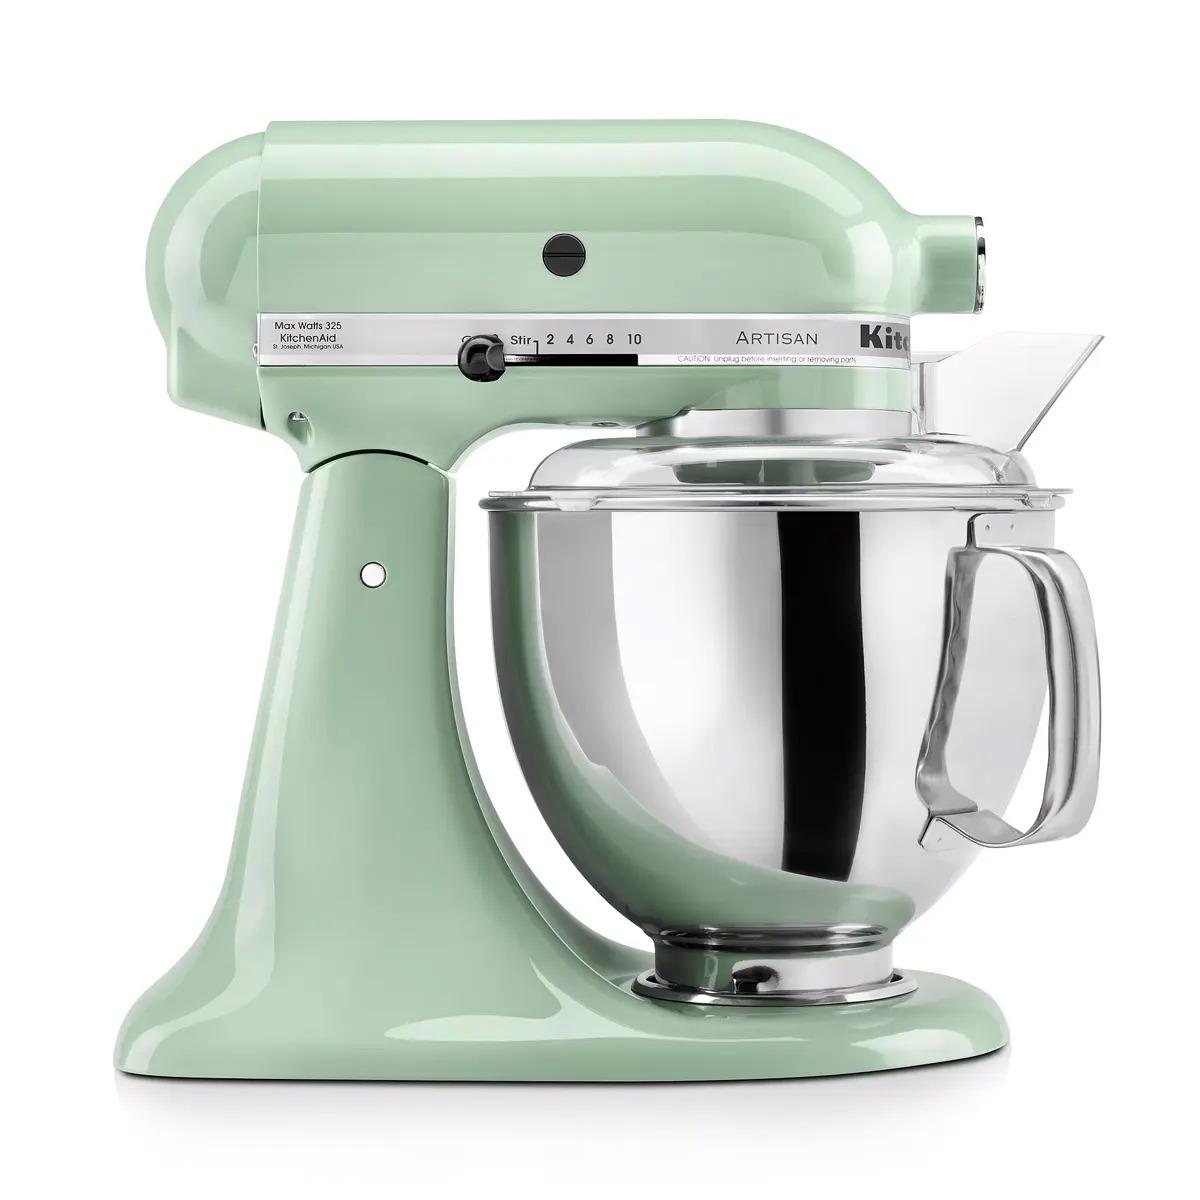 KitchenAid Artisan 5Q Tilt Head Stand Mixer Stainless Steel Bowl for $279.99 Shipped